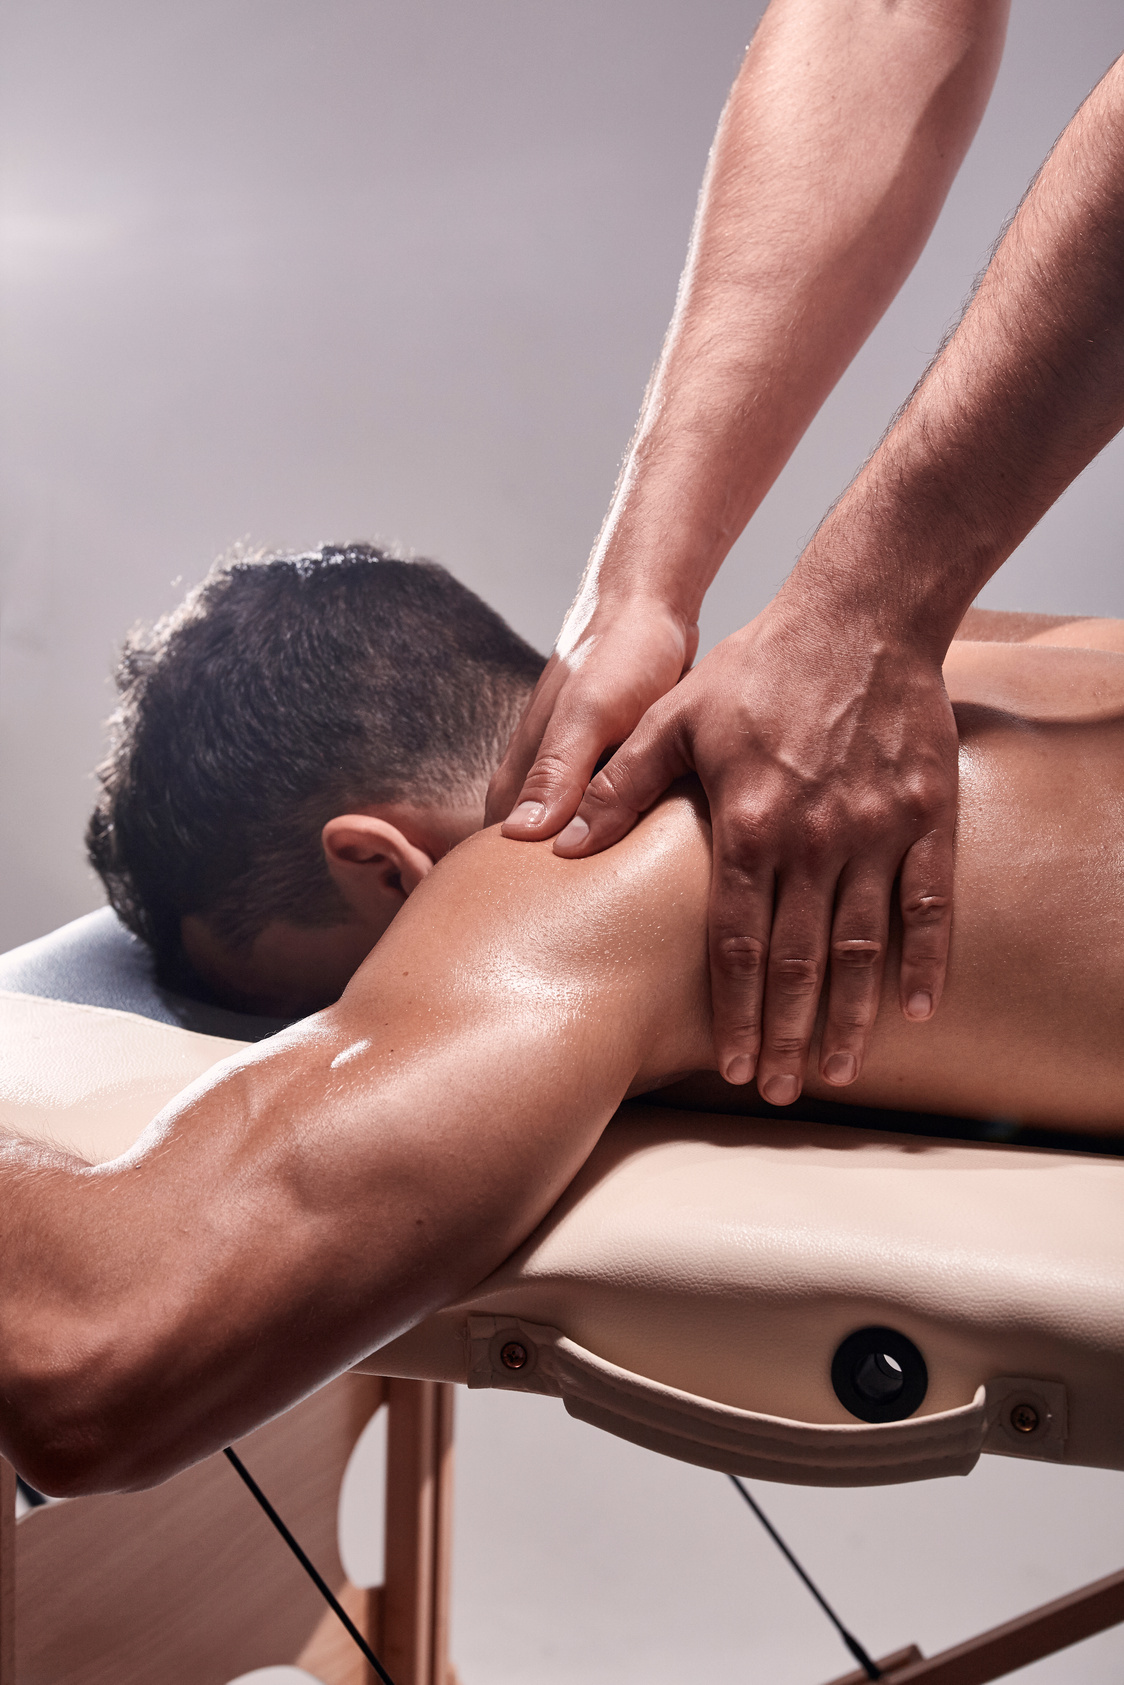 Side View, Two Young Man, 20-29 Years Old, Sports Physiotherapy Indoors in Studio, Photo Shoot. Physiotherapist Massaging Patient Shoulder with His Hands Close-up.